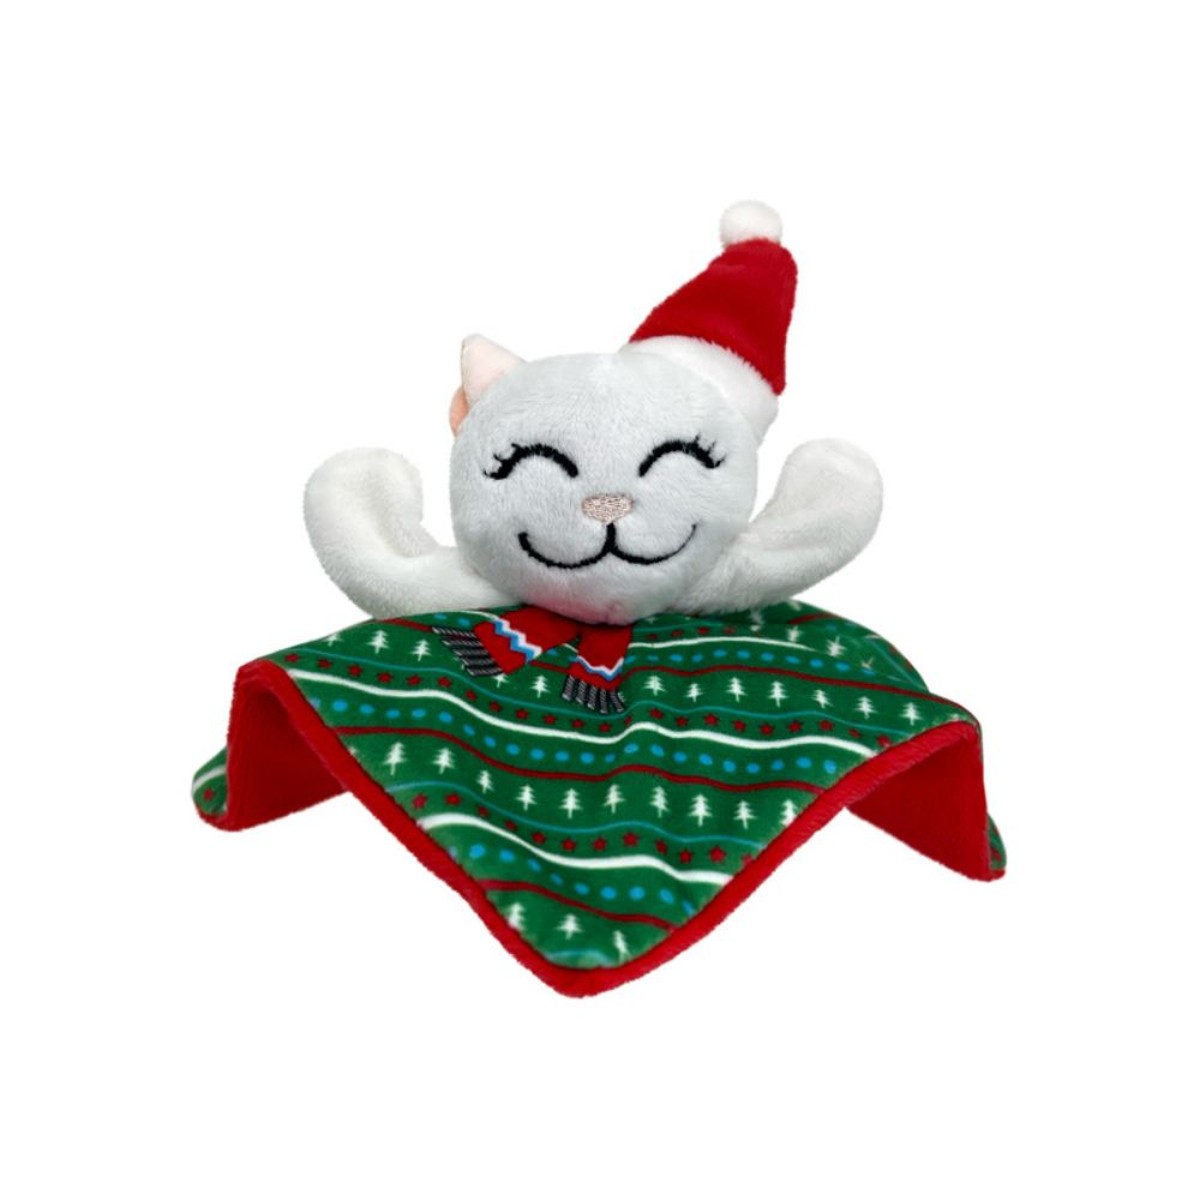 KONG Holiday Crackles Cat Toy - Santa Kitty with Trees Green